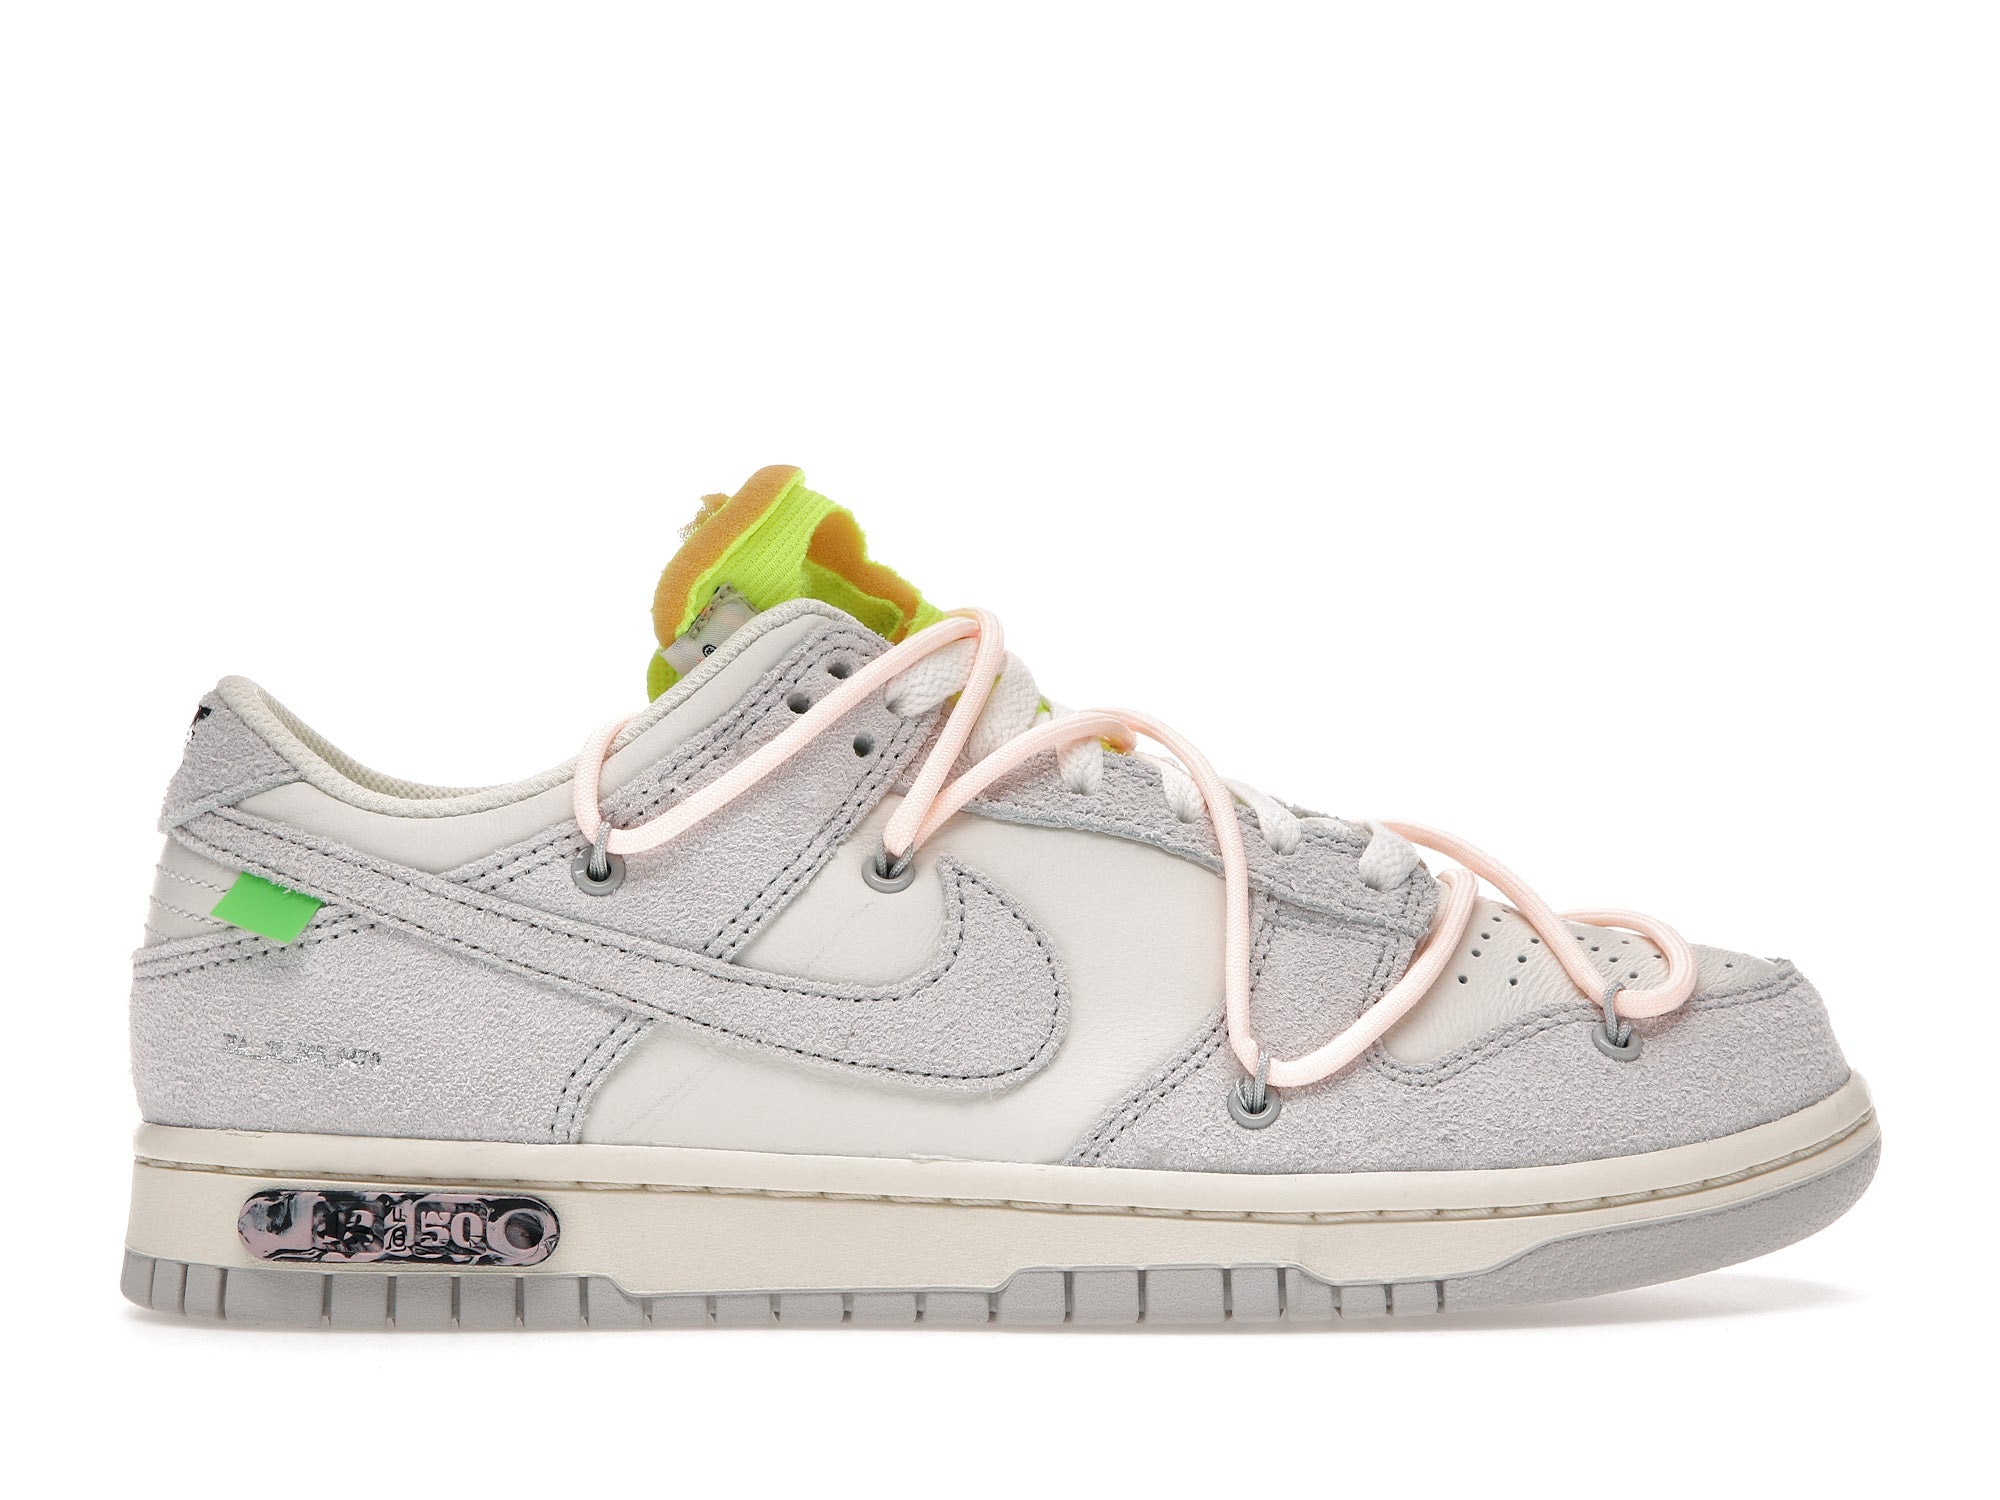 Nike Dunk Low Off-White Lot 22 Request – Justshopyourshoes